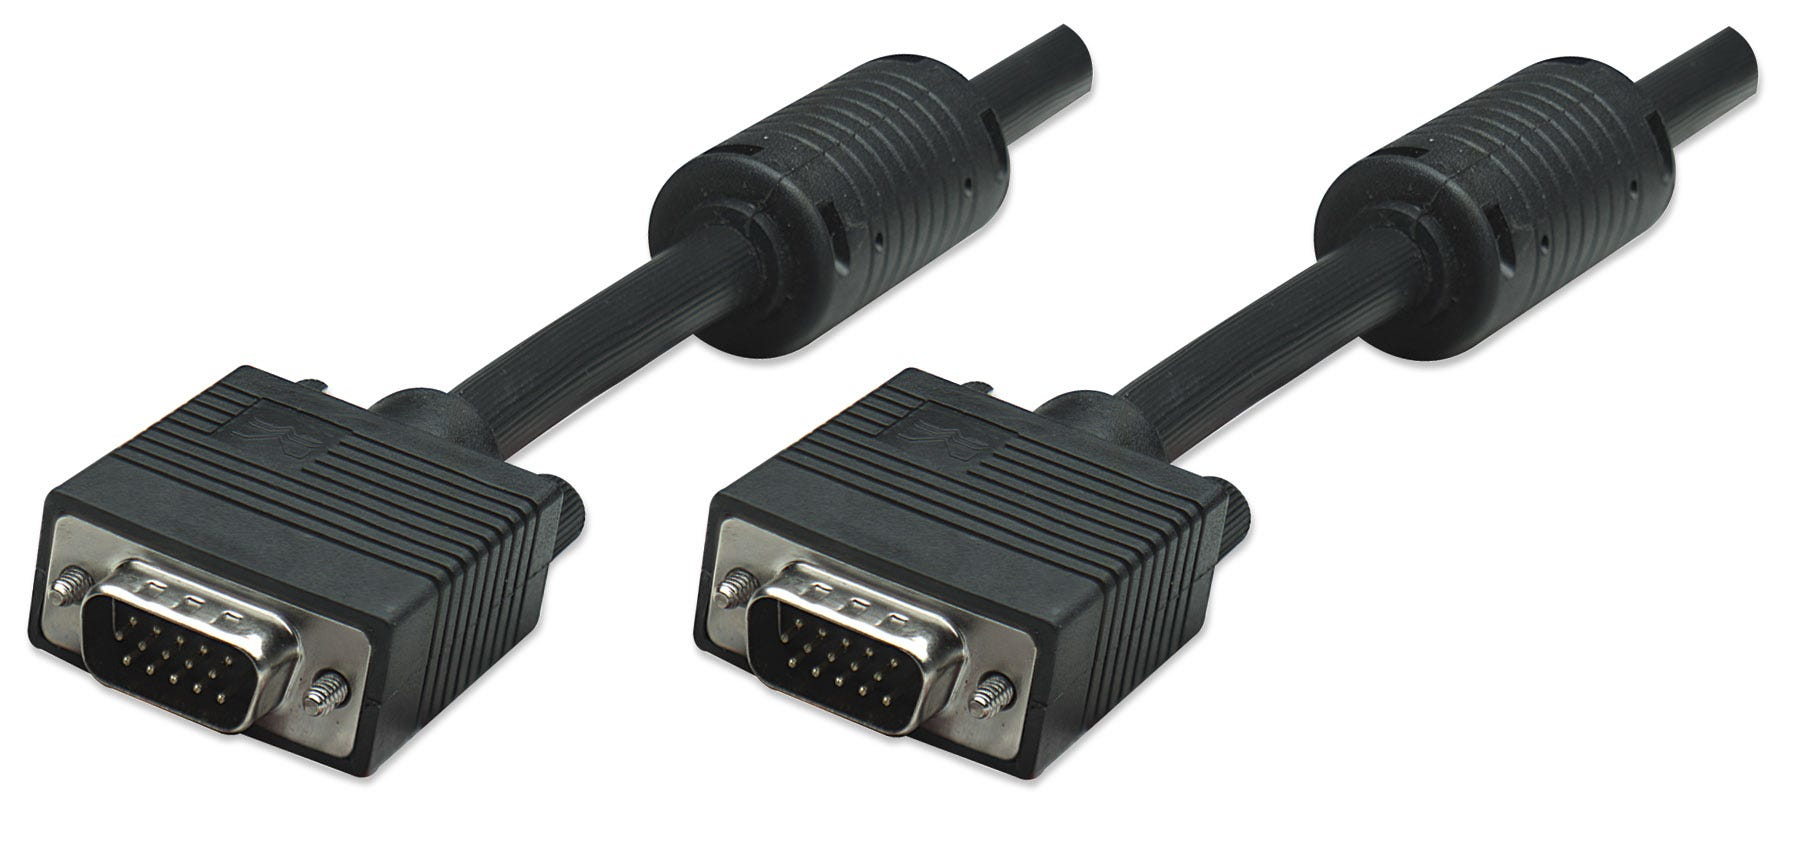 Manhattan VGA Monitor Cable (with Ferrite Cores), 4.5m, Black, Male to Male, HD15, Cable of higher SVGA Specification (fully compatible)